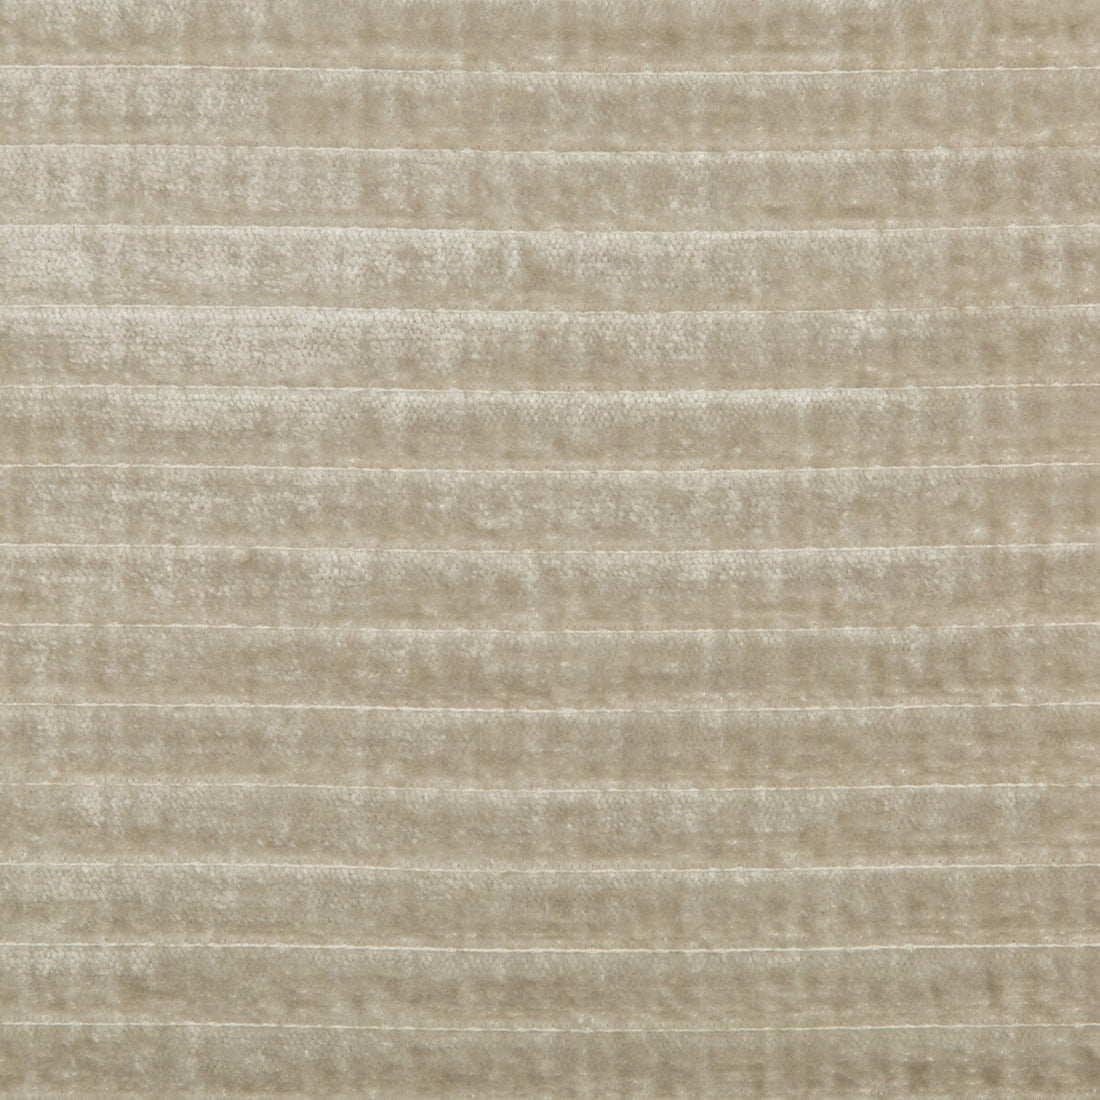 Kravet Smart fabric in 35780-1116 color - pattern 35780.1116.0 - by Kravet Smart in the Performance collection